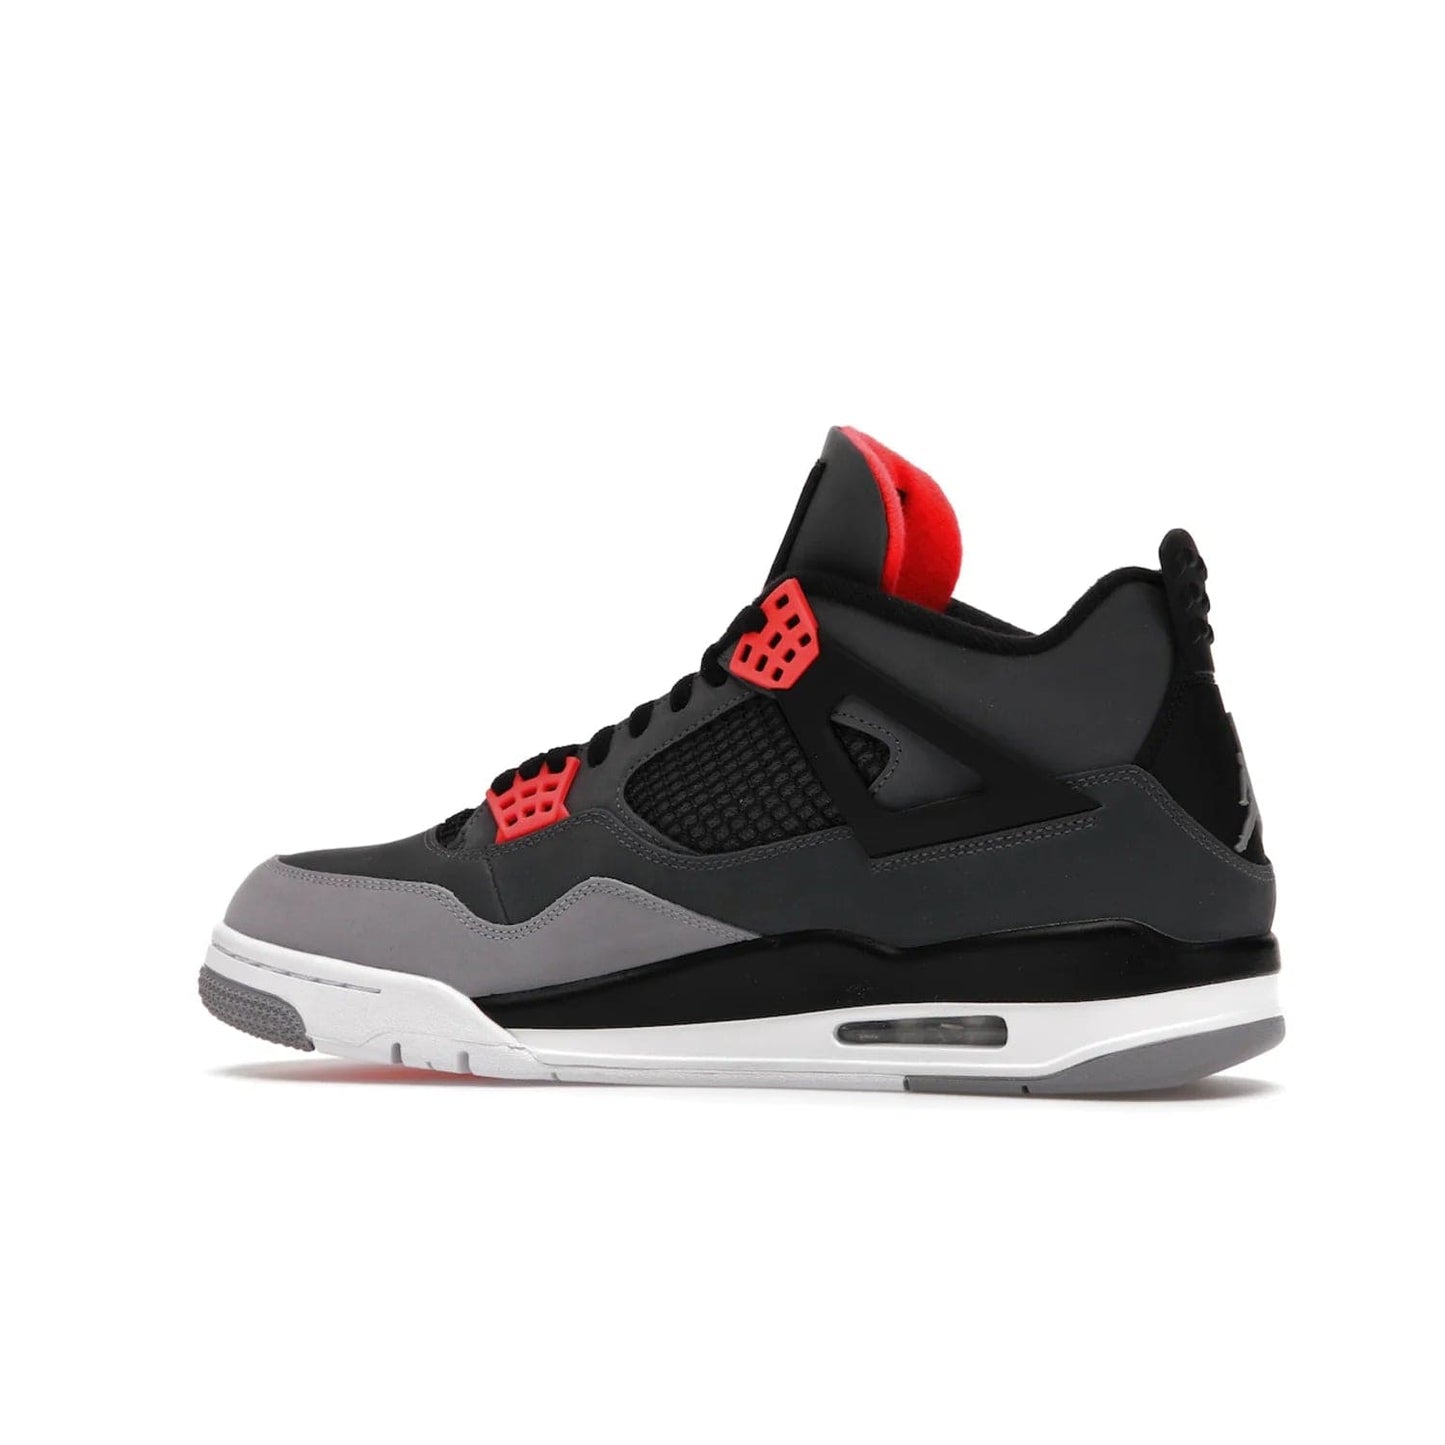 Jordan 4 Retro Infrared - Image 21 - Only at www.BallersClubKickz.com - Introducing the classic & timeless Air Jordan 4 Infrared. Durabuck upper, TPU mesh inserts, tech straps & heel tabs in dark grey and infrared accents. White sole with visible Air units. Out June 15, 2022. Get your pair now!